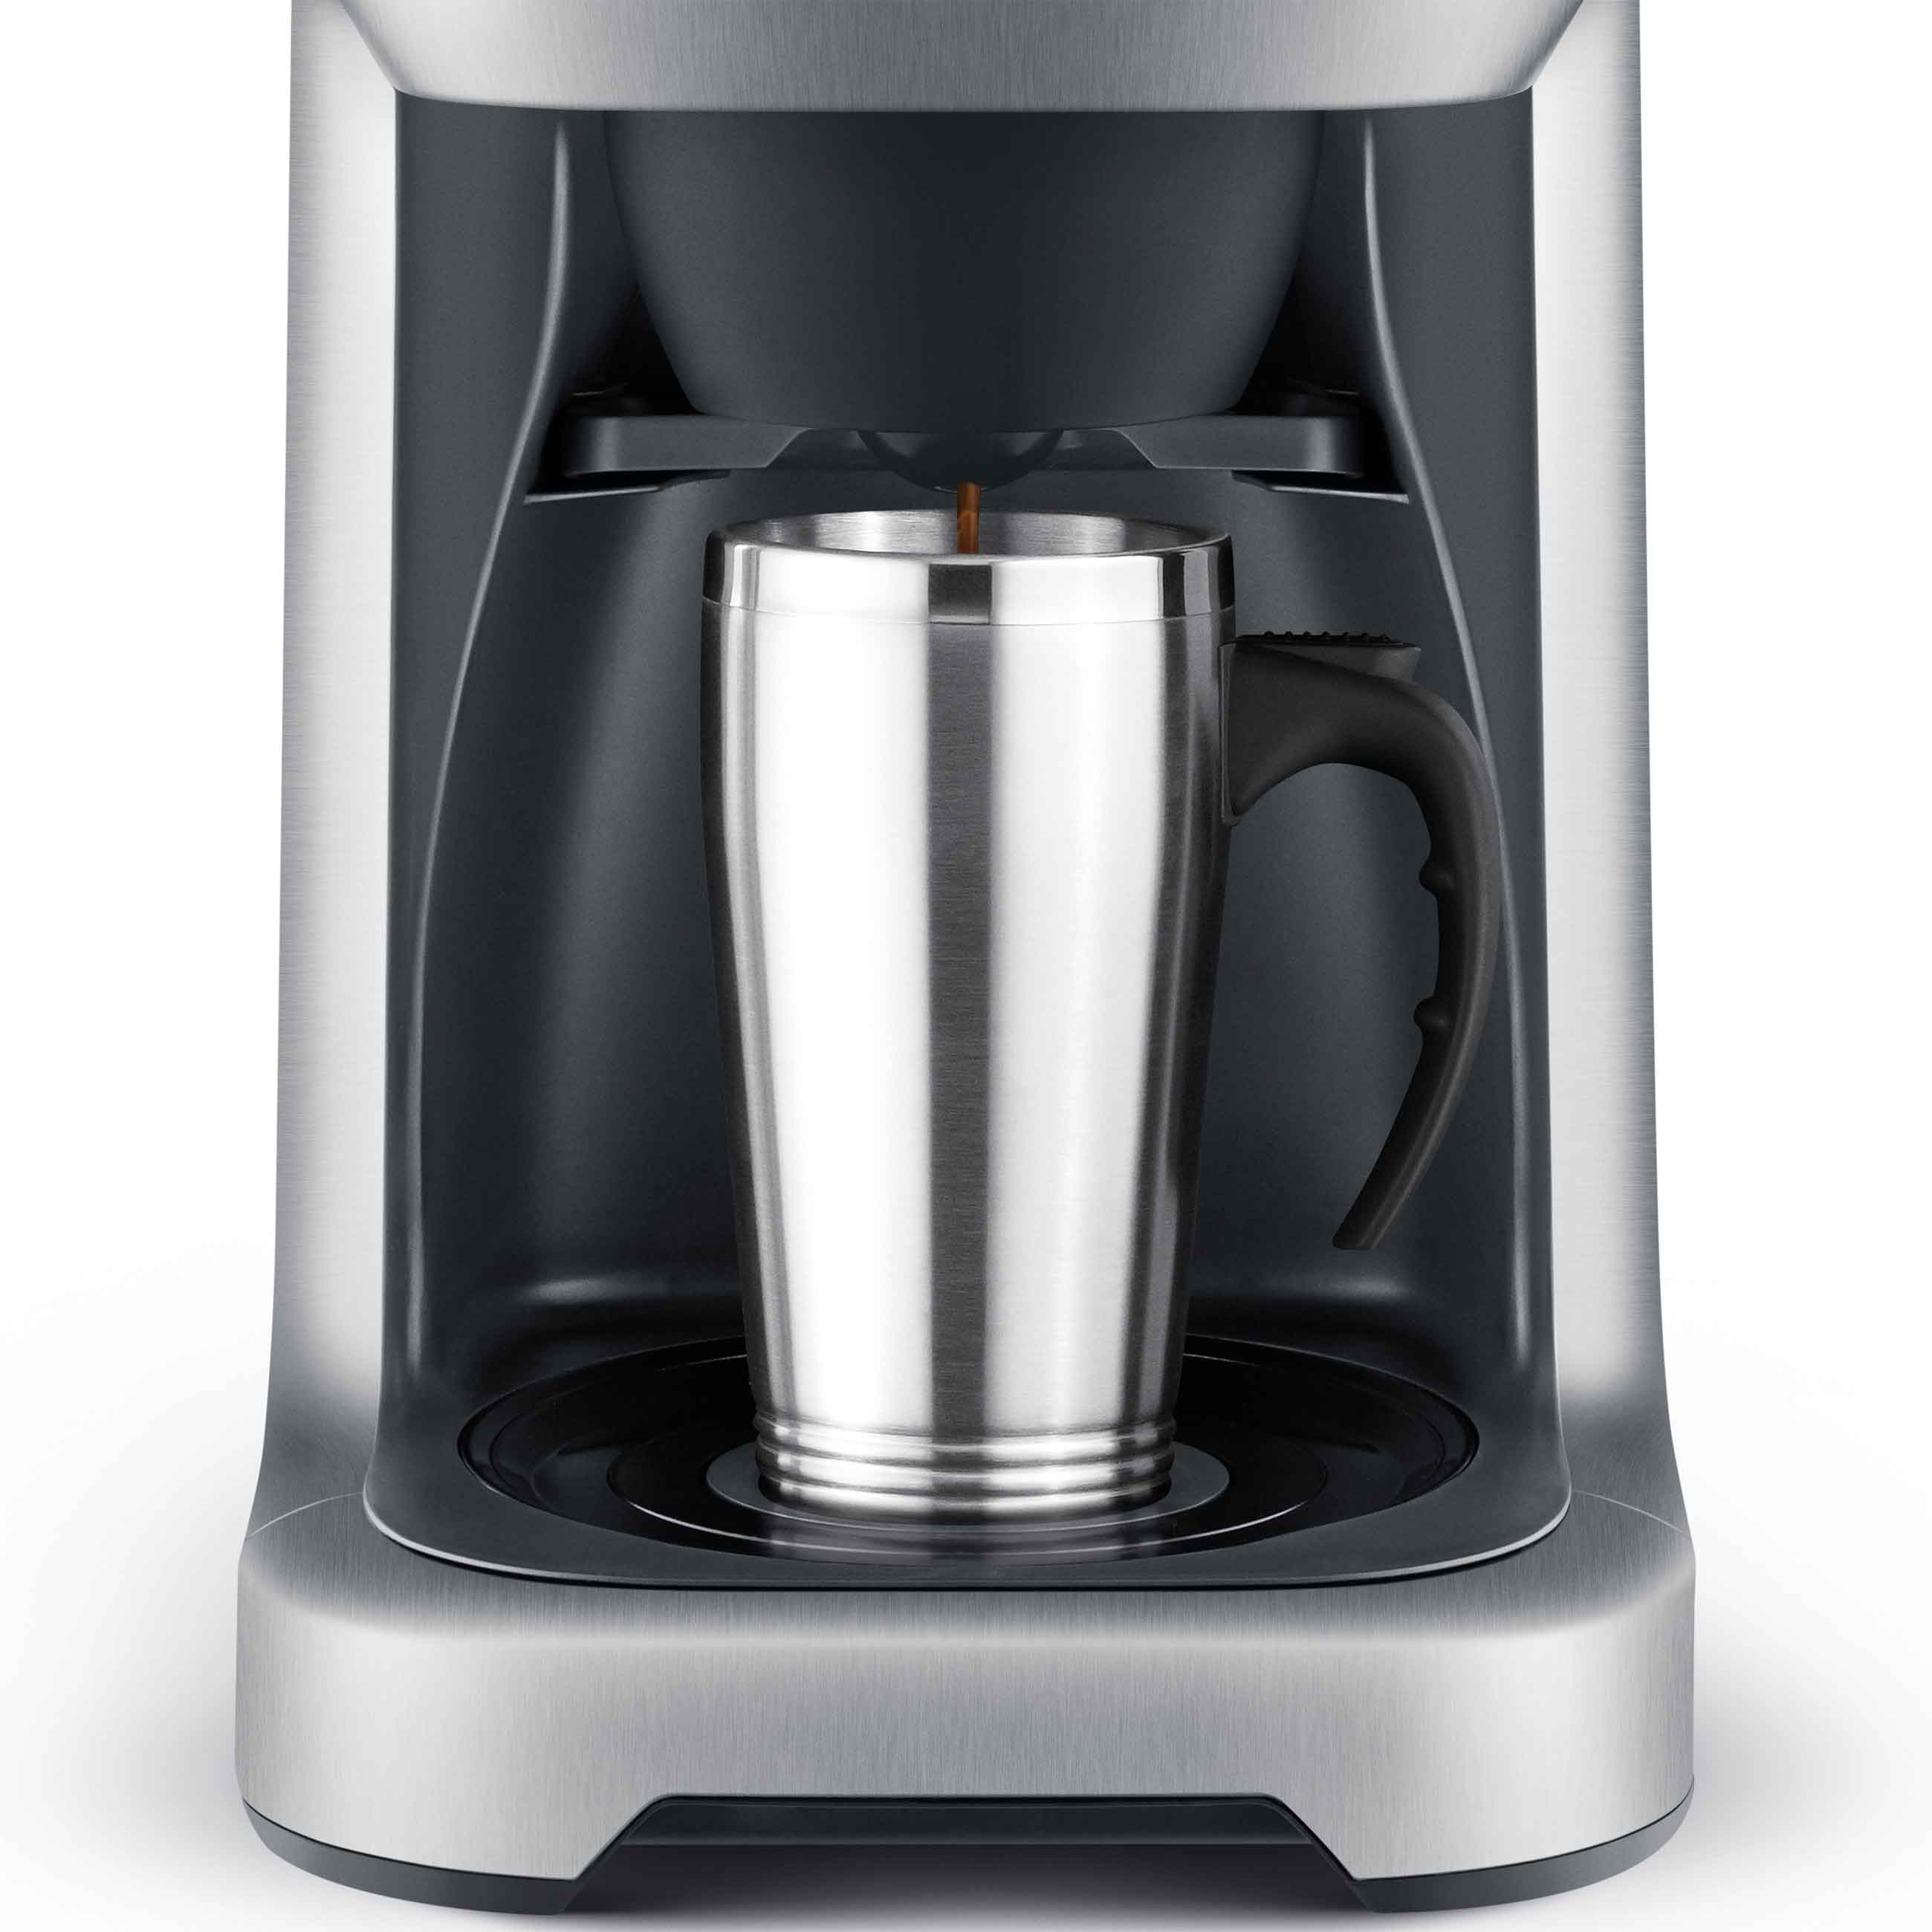 Breville Grind Control 12-Cups Stainless Steel Coffee Maker